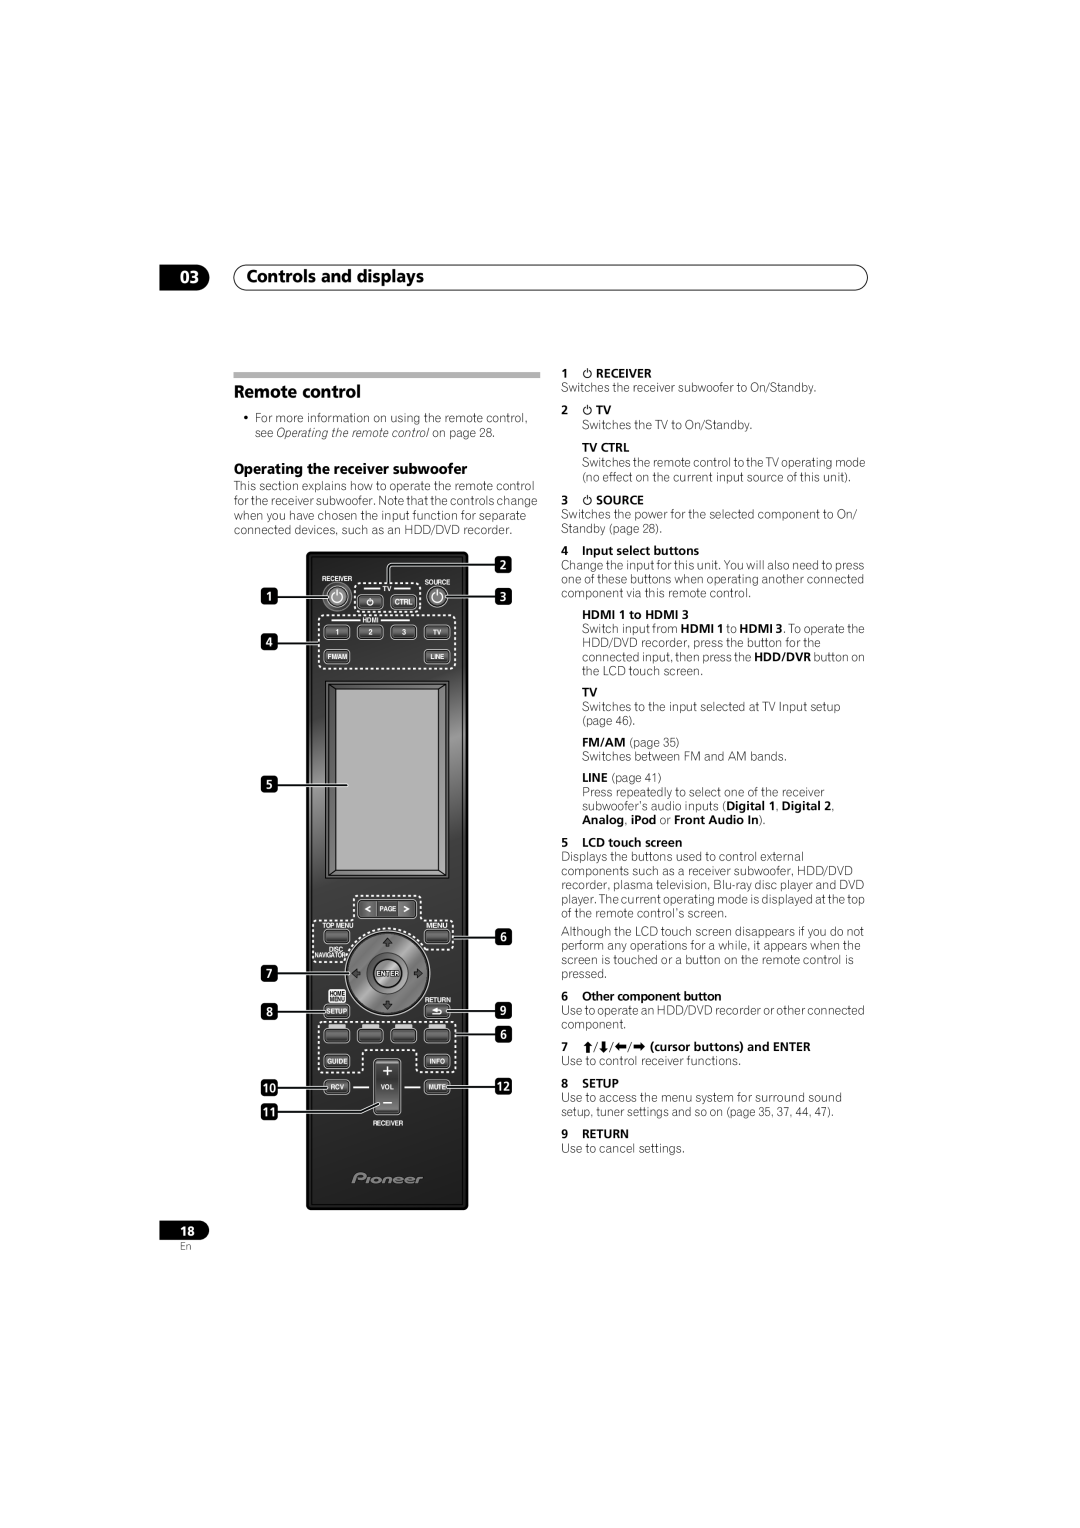 Pioneer SX-LX70SW manual 03Controls and displays, Remote control, Operating the receiver subwoofer 